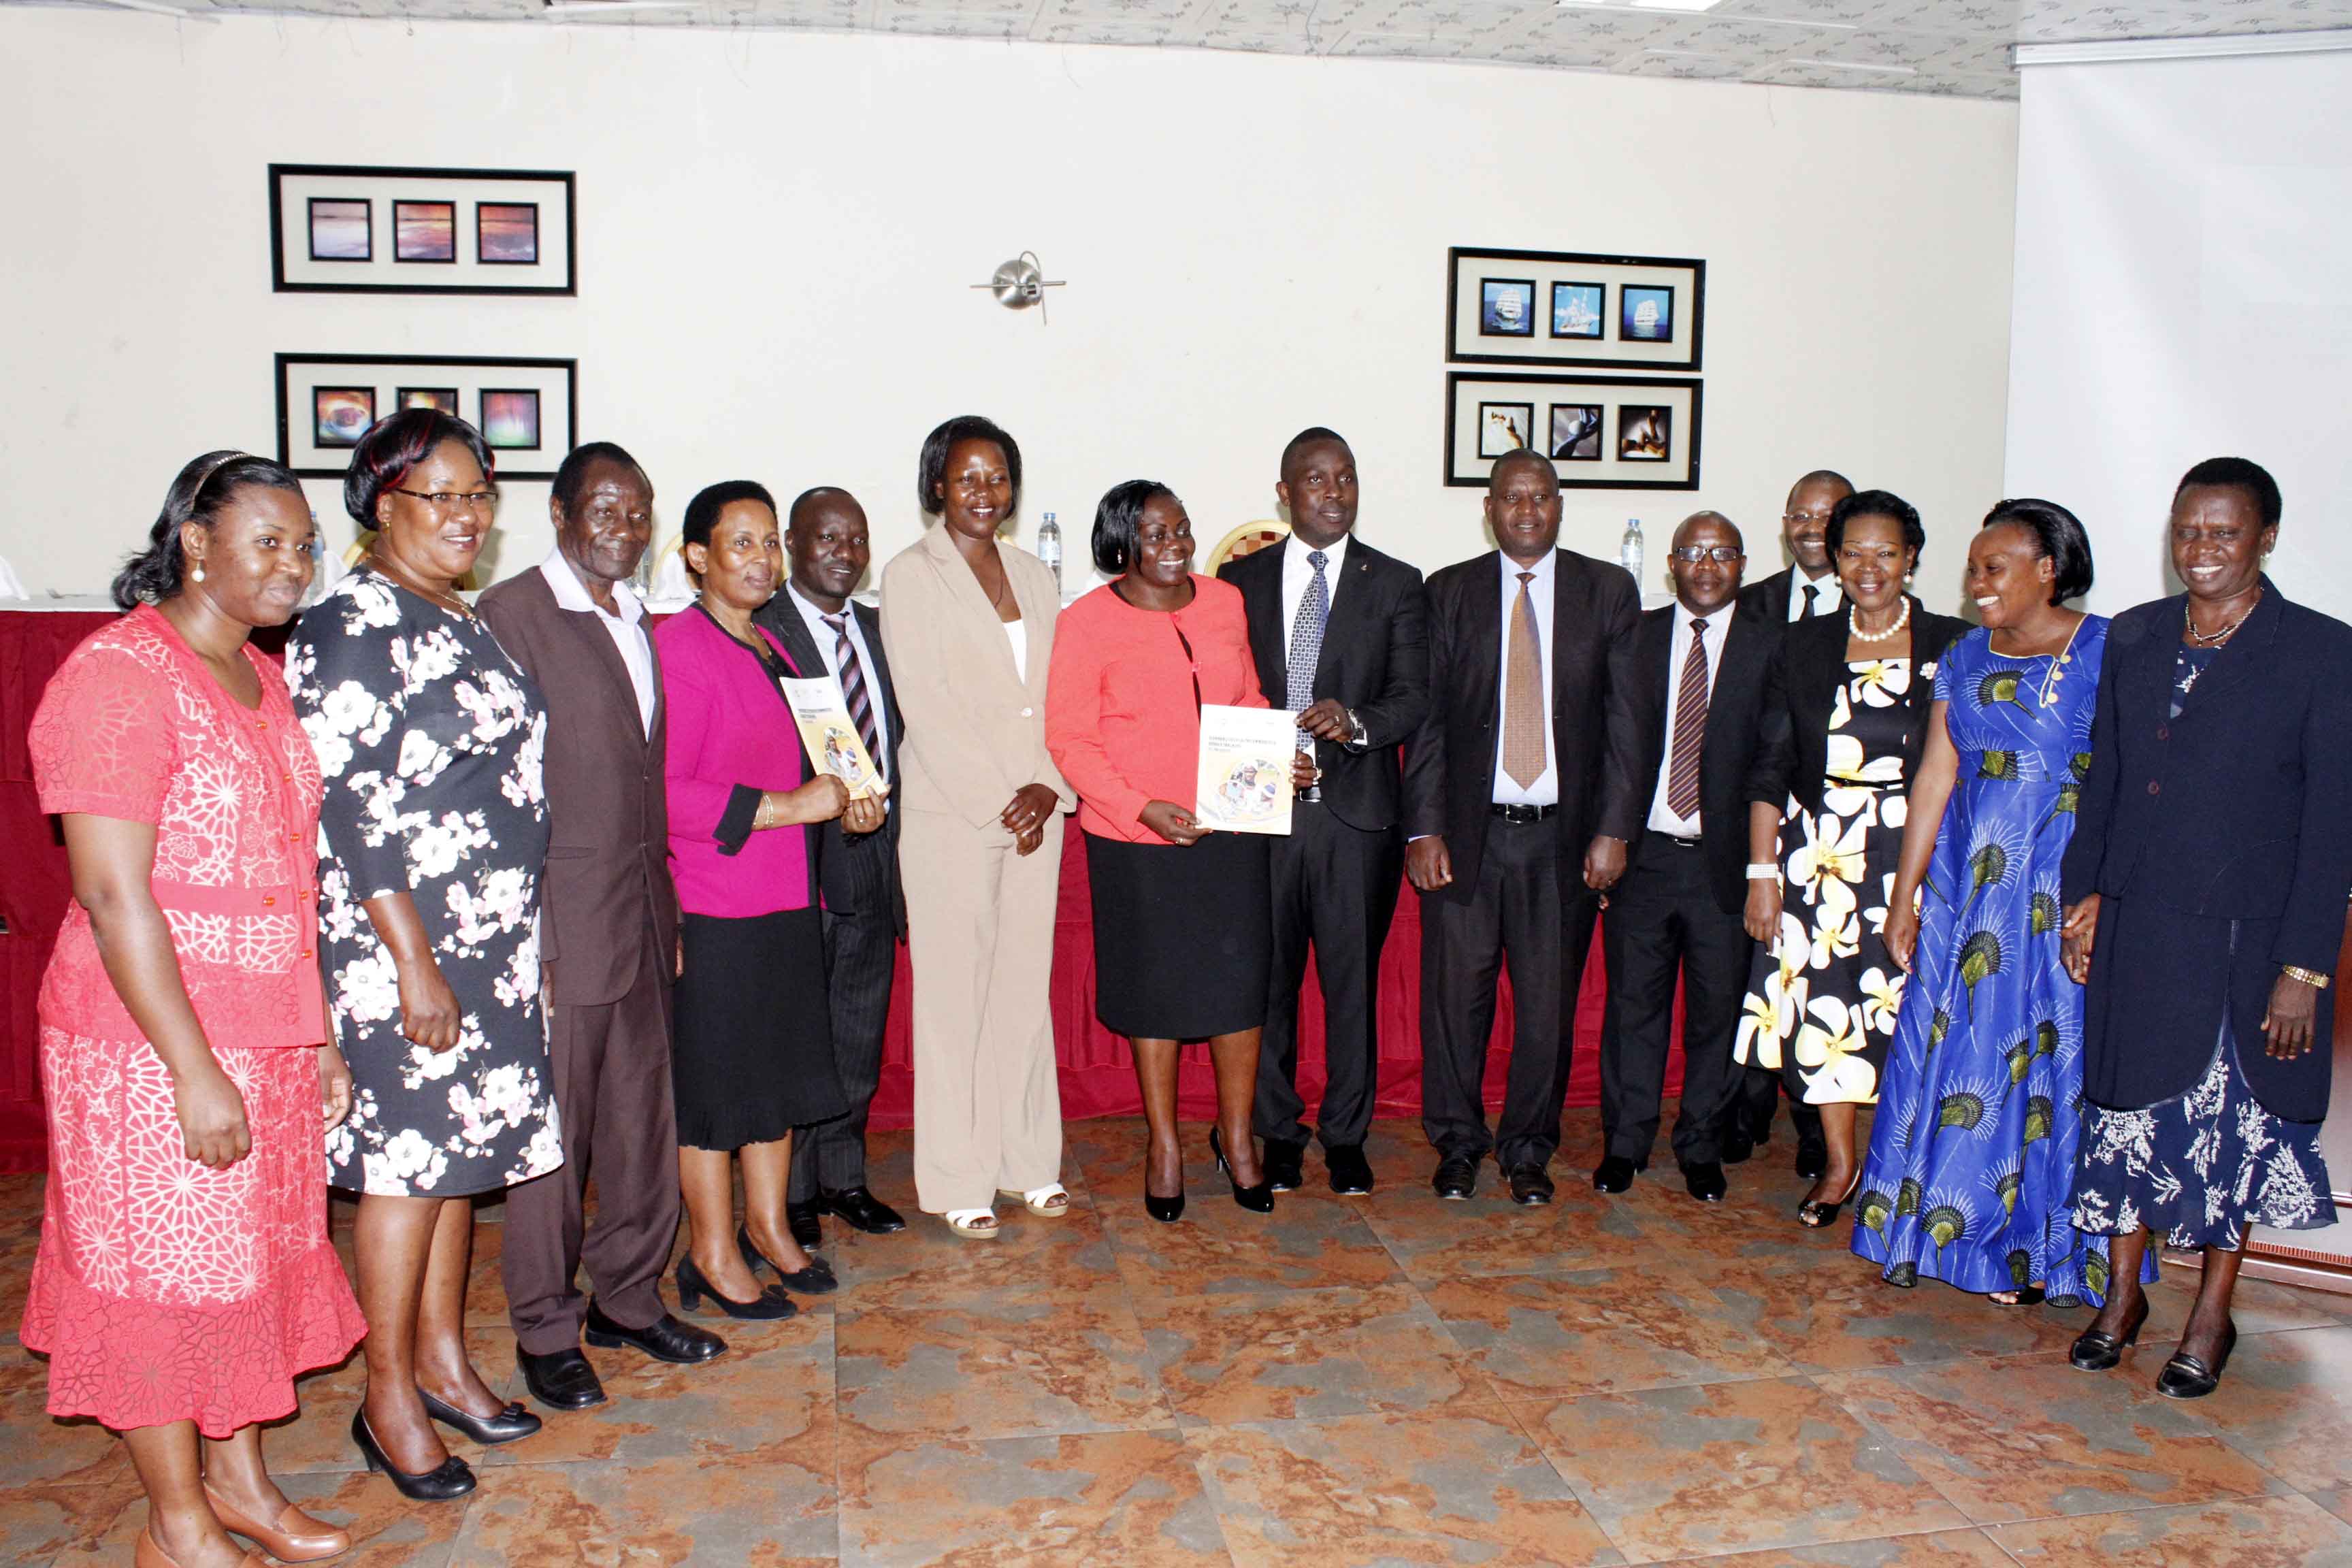 Parliamentarians and Ministers at the official launch of the report.